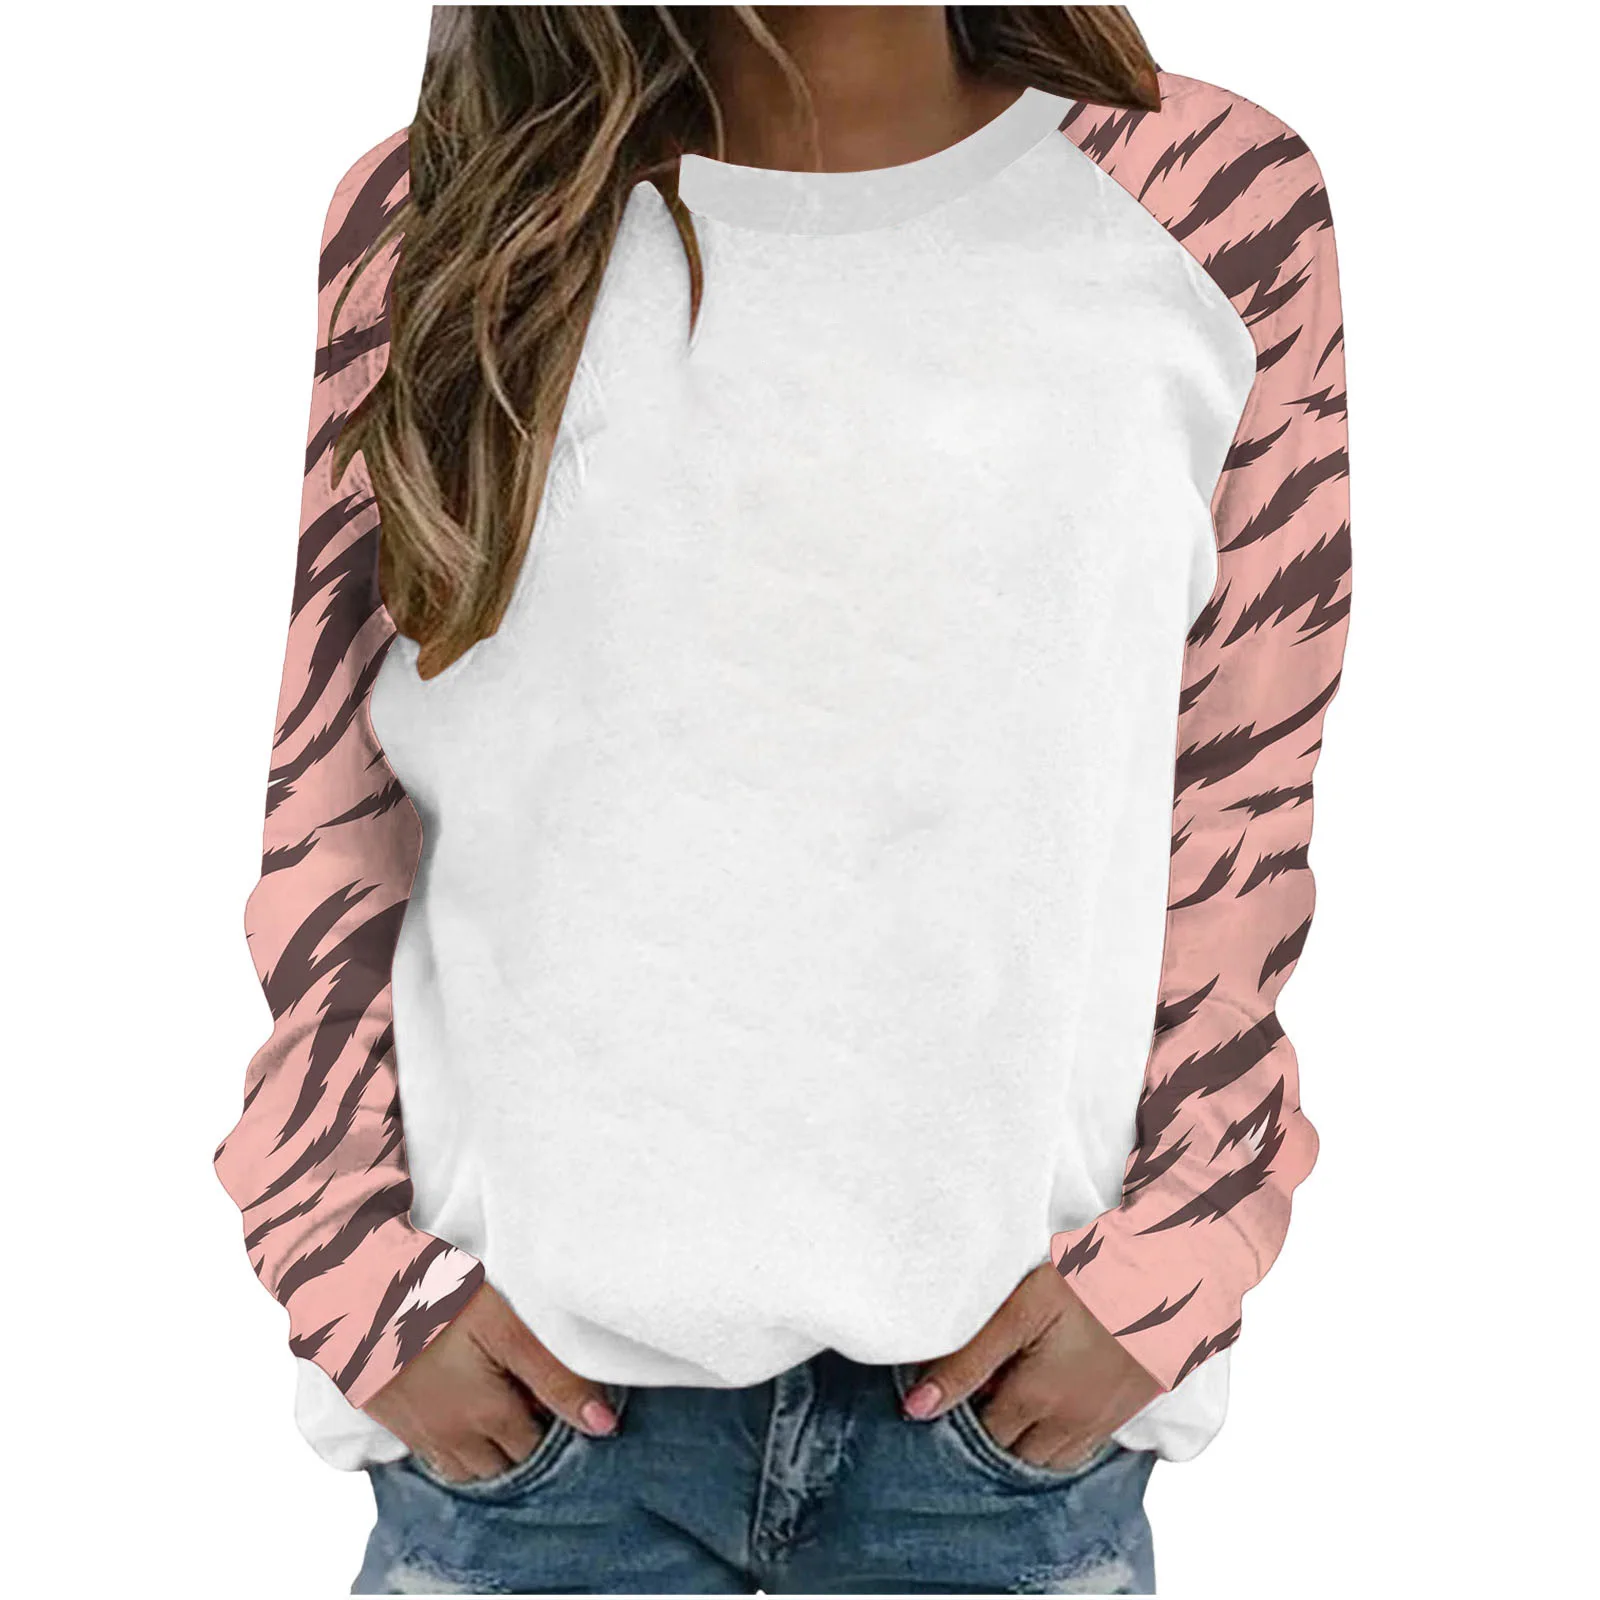 2022 New Women's Fashion Casual Loose Leopard Print Long-sleeved Round Neck Women's Top Sweater Women